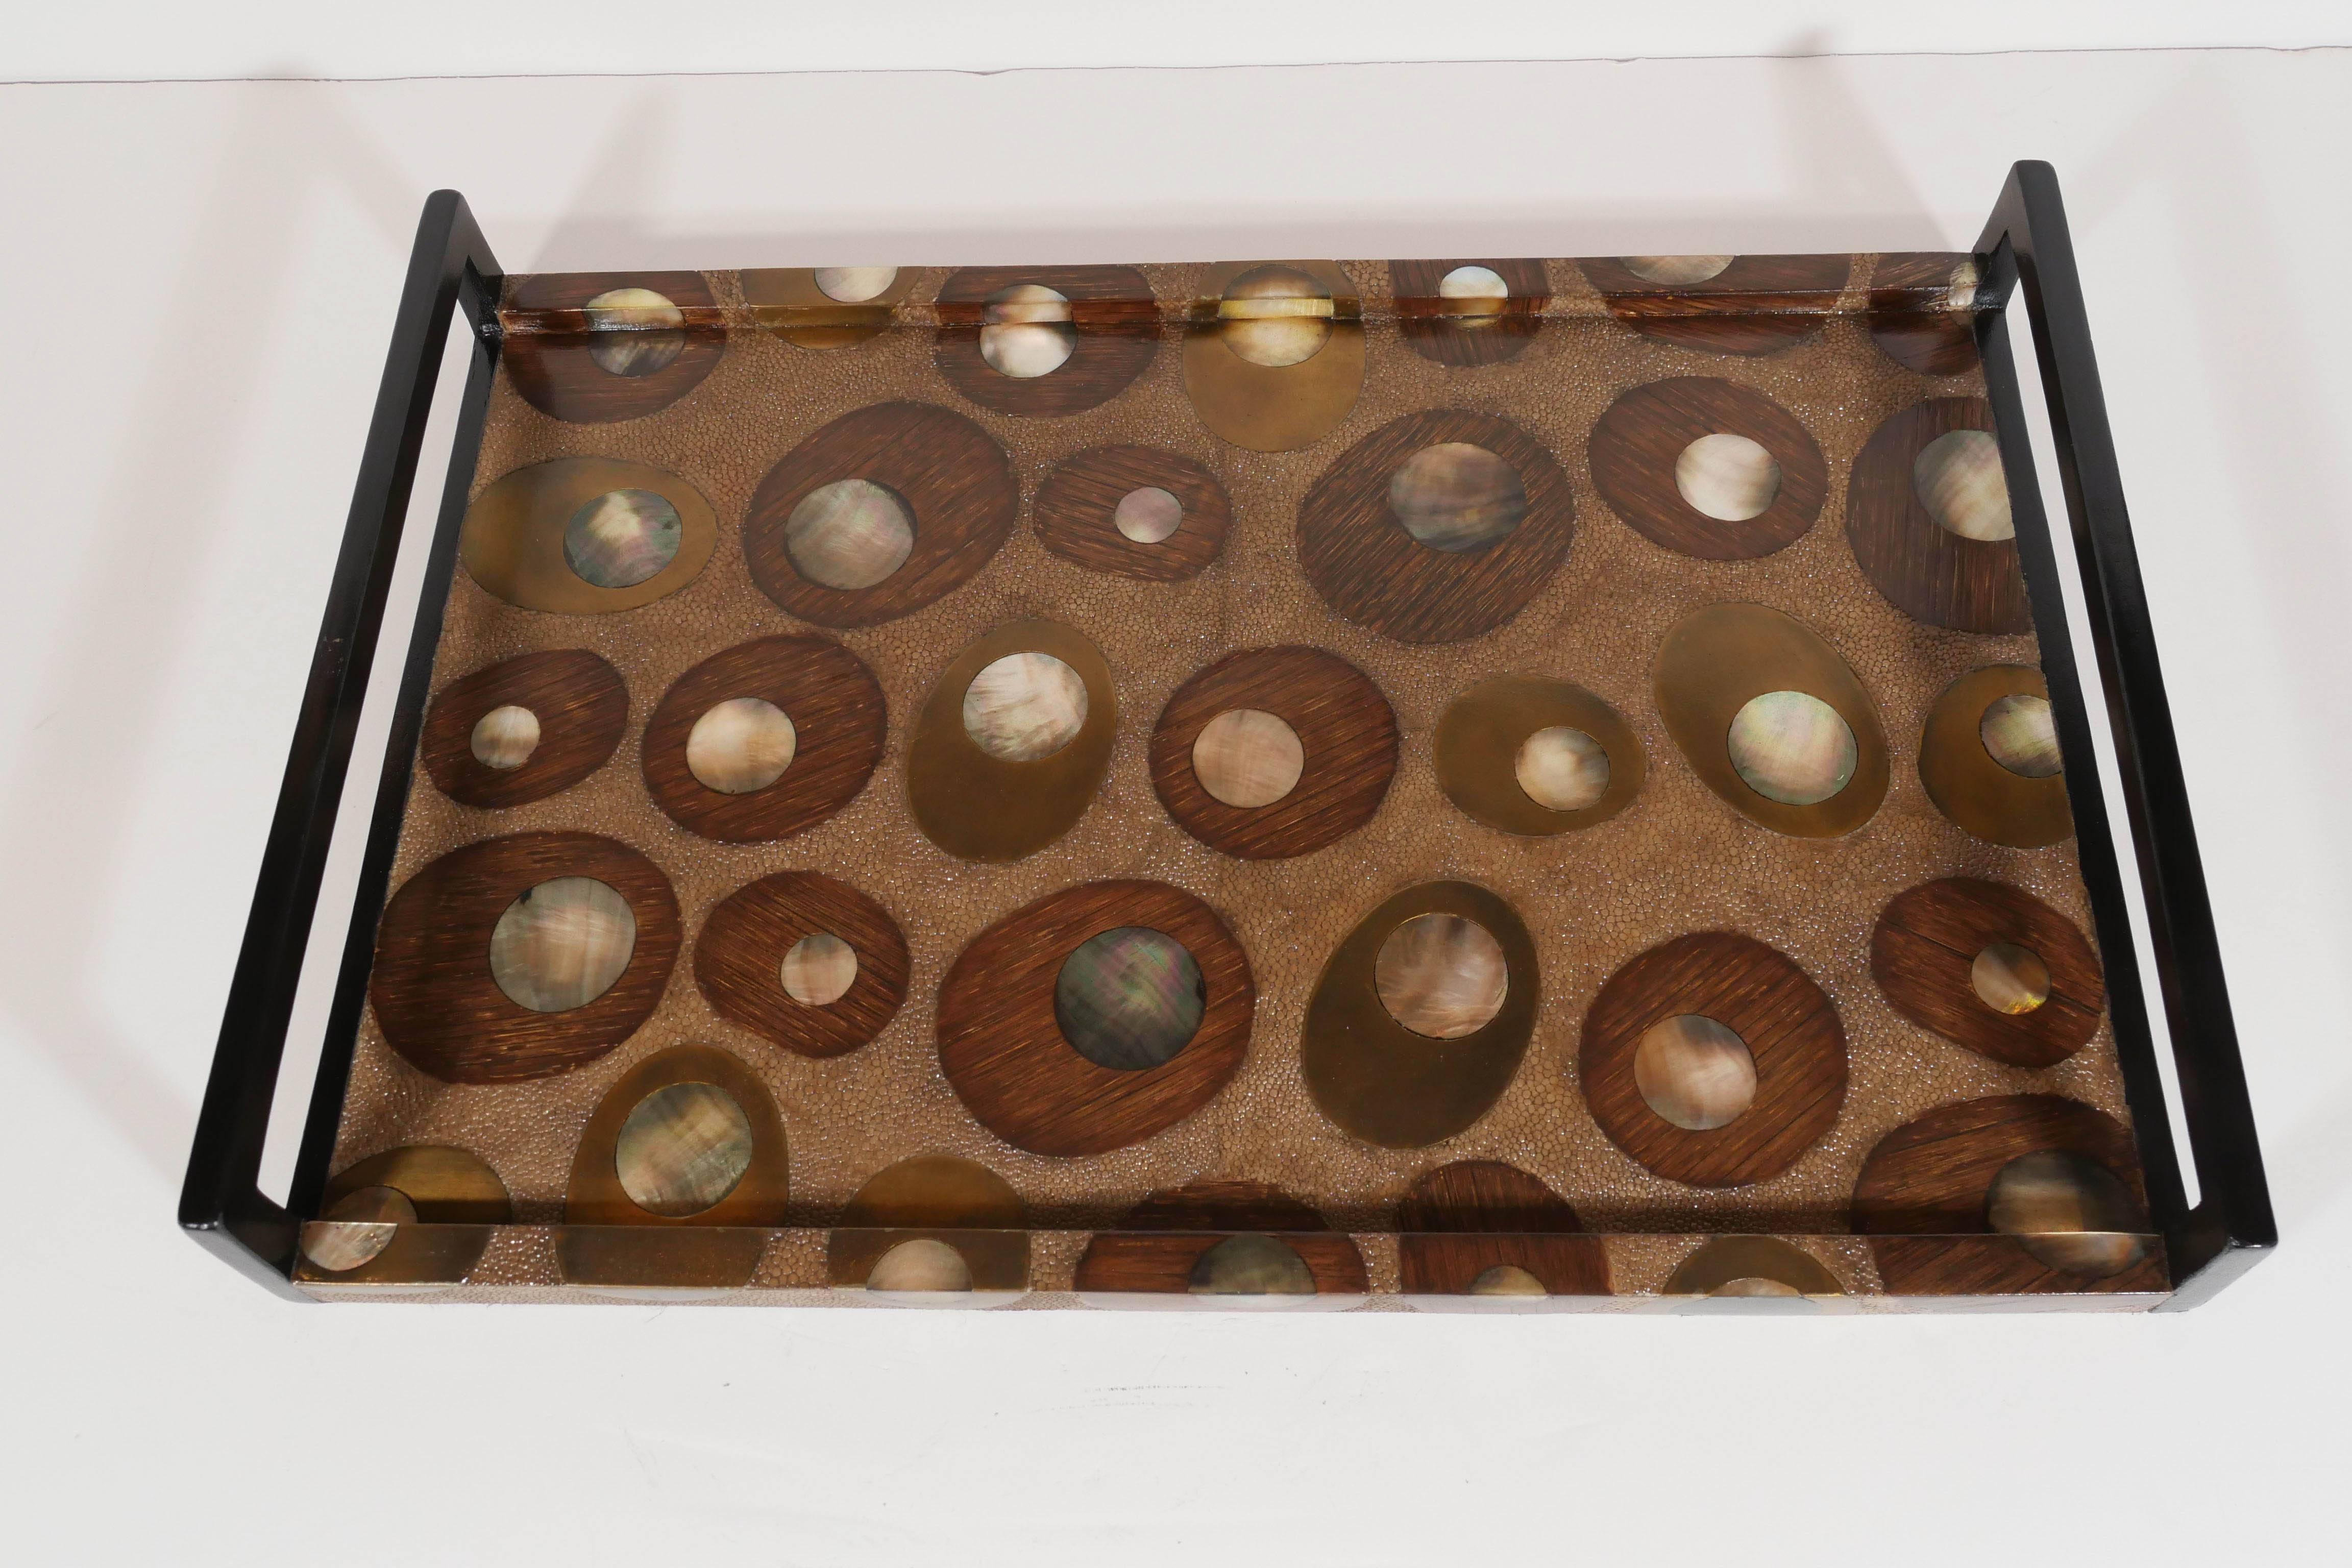 Exquisite hand crafted serving tray featuring a spectacular variety of textured materials.  Covered in exotic shagreen with hues of tan, and features mother-of-pearl inlays over palmwood insets. The combination creates a beautiful concentric and